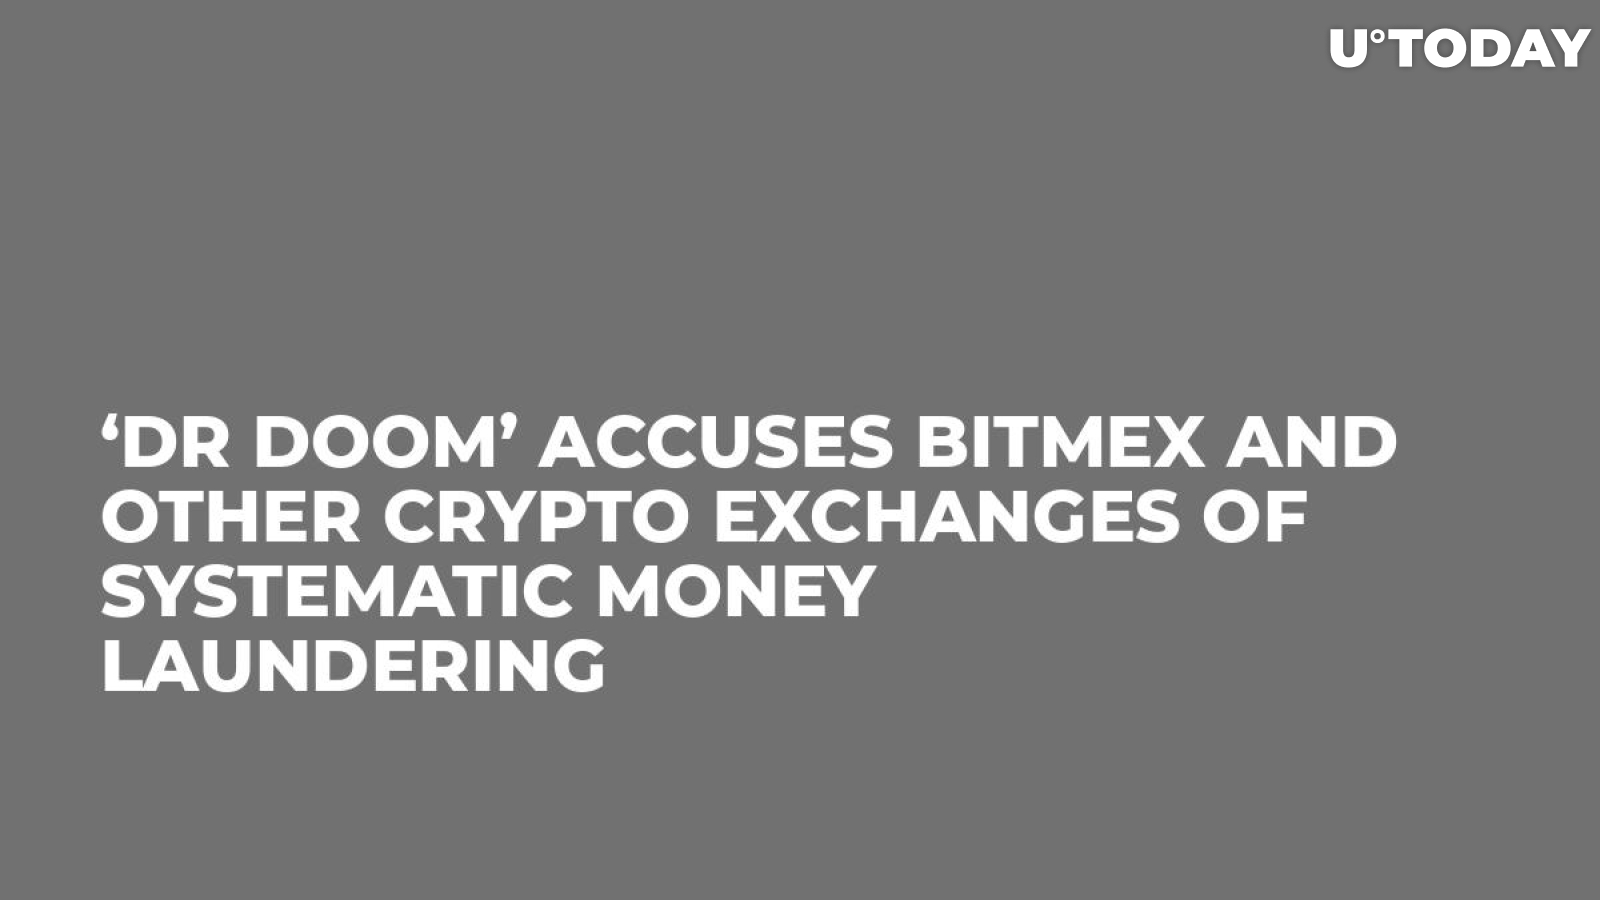 ‘Dr Doom’ Accuses BitMEX and Other Crypto Exchanges of Systematic Money Laundering